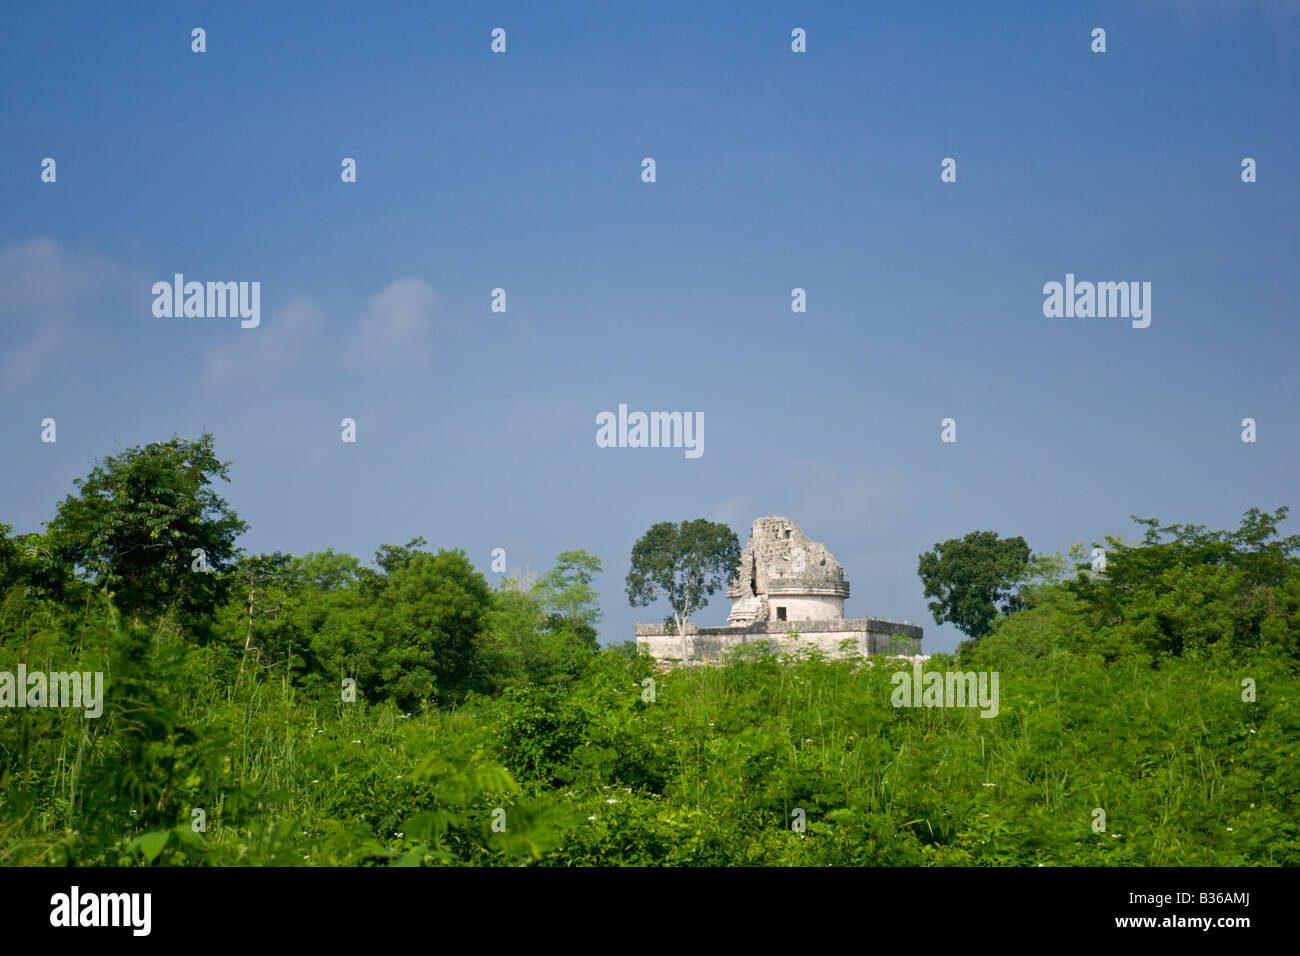 The ruins of El Caracol Observatory or 'The Observatory' at the Mayan archeological site of Chichen Itza in Yucatan, Mexico. Stock Photo